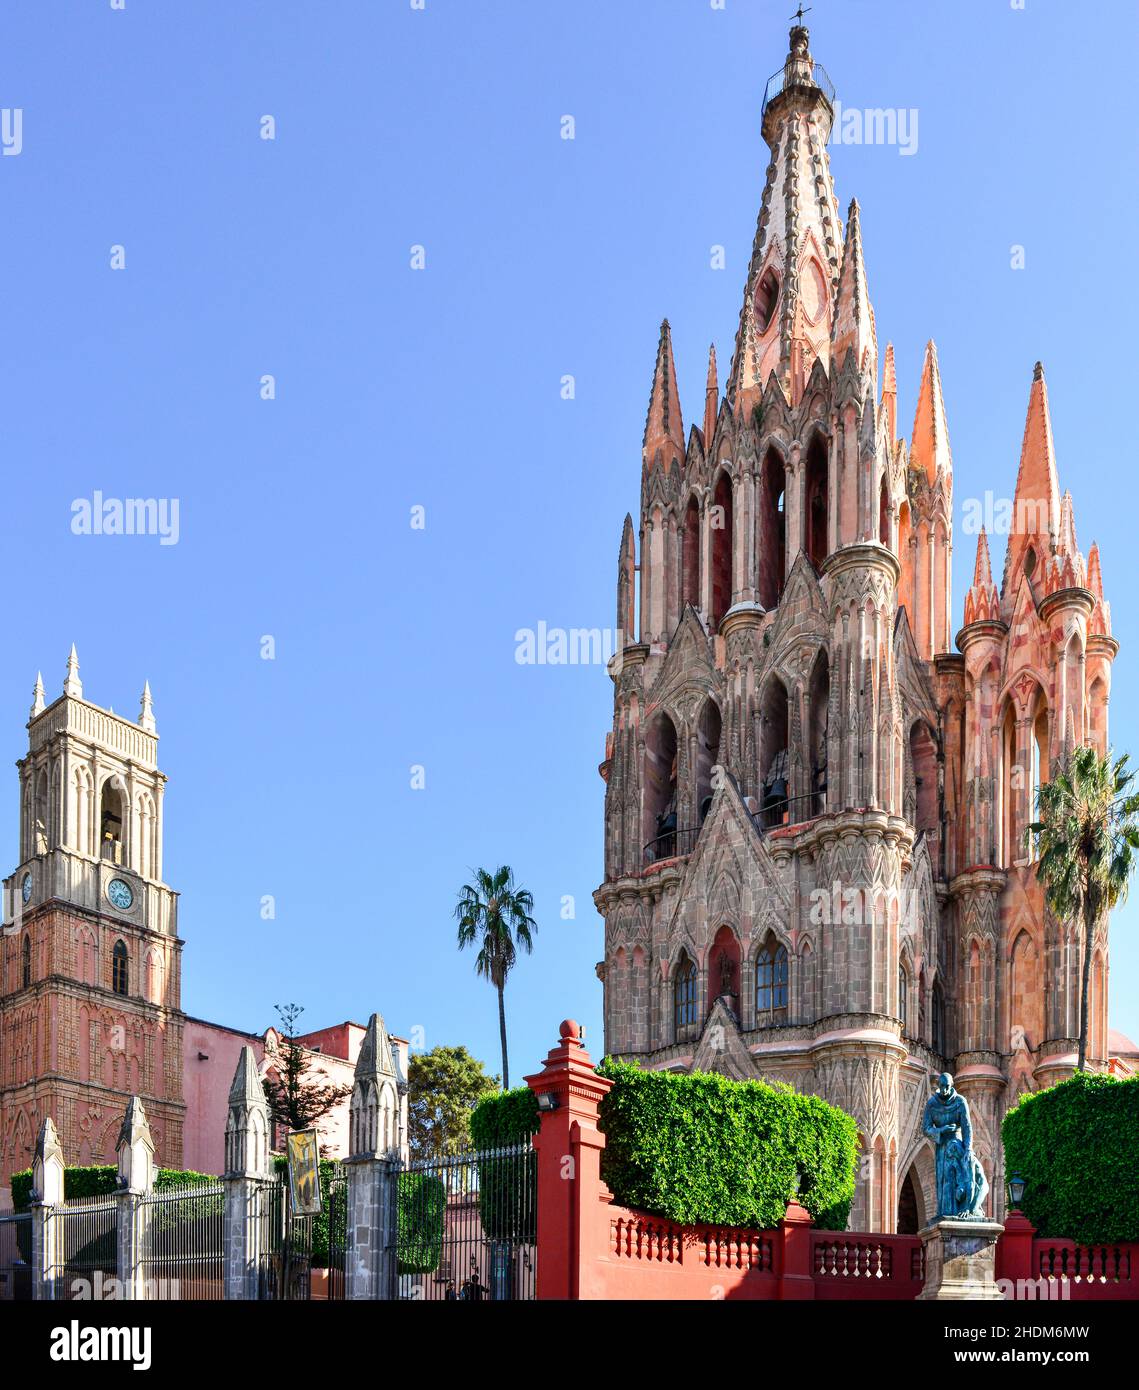 View of the spectacular pink 17th Century Neo-Gothic Parroquia de San Miguel Arcangel cathedral with statue of Fray Juan de Torquemada, in San Miguel Stock Photo